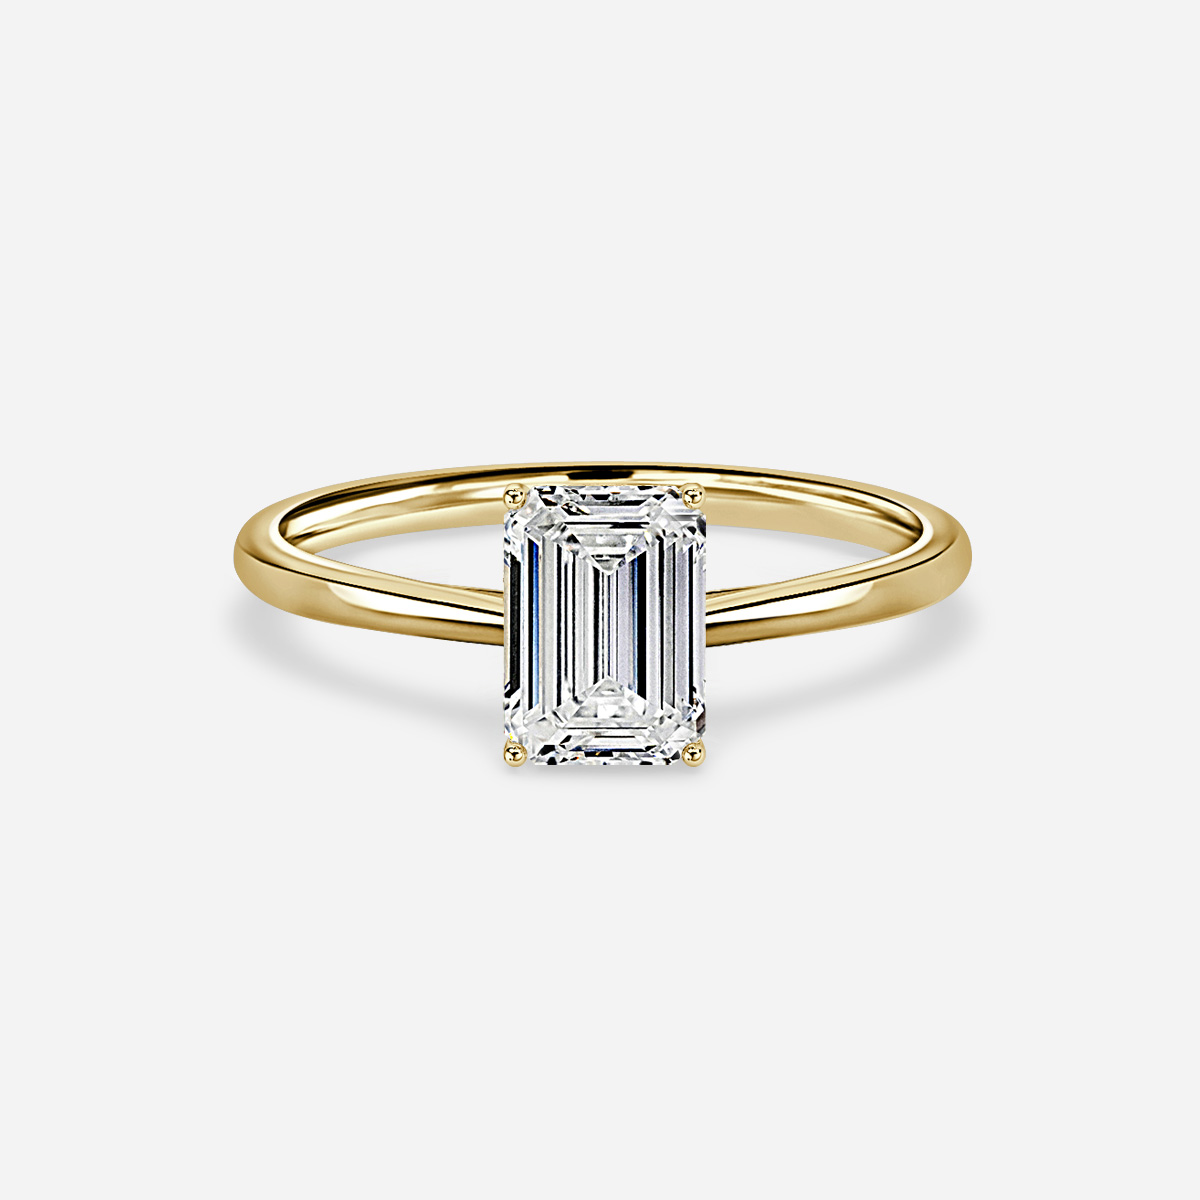 Jessie Tulip Yellow Gold Solitaire Engagement Ring